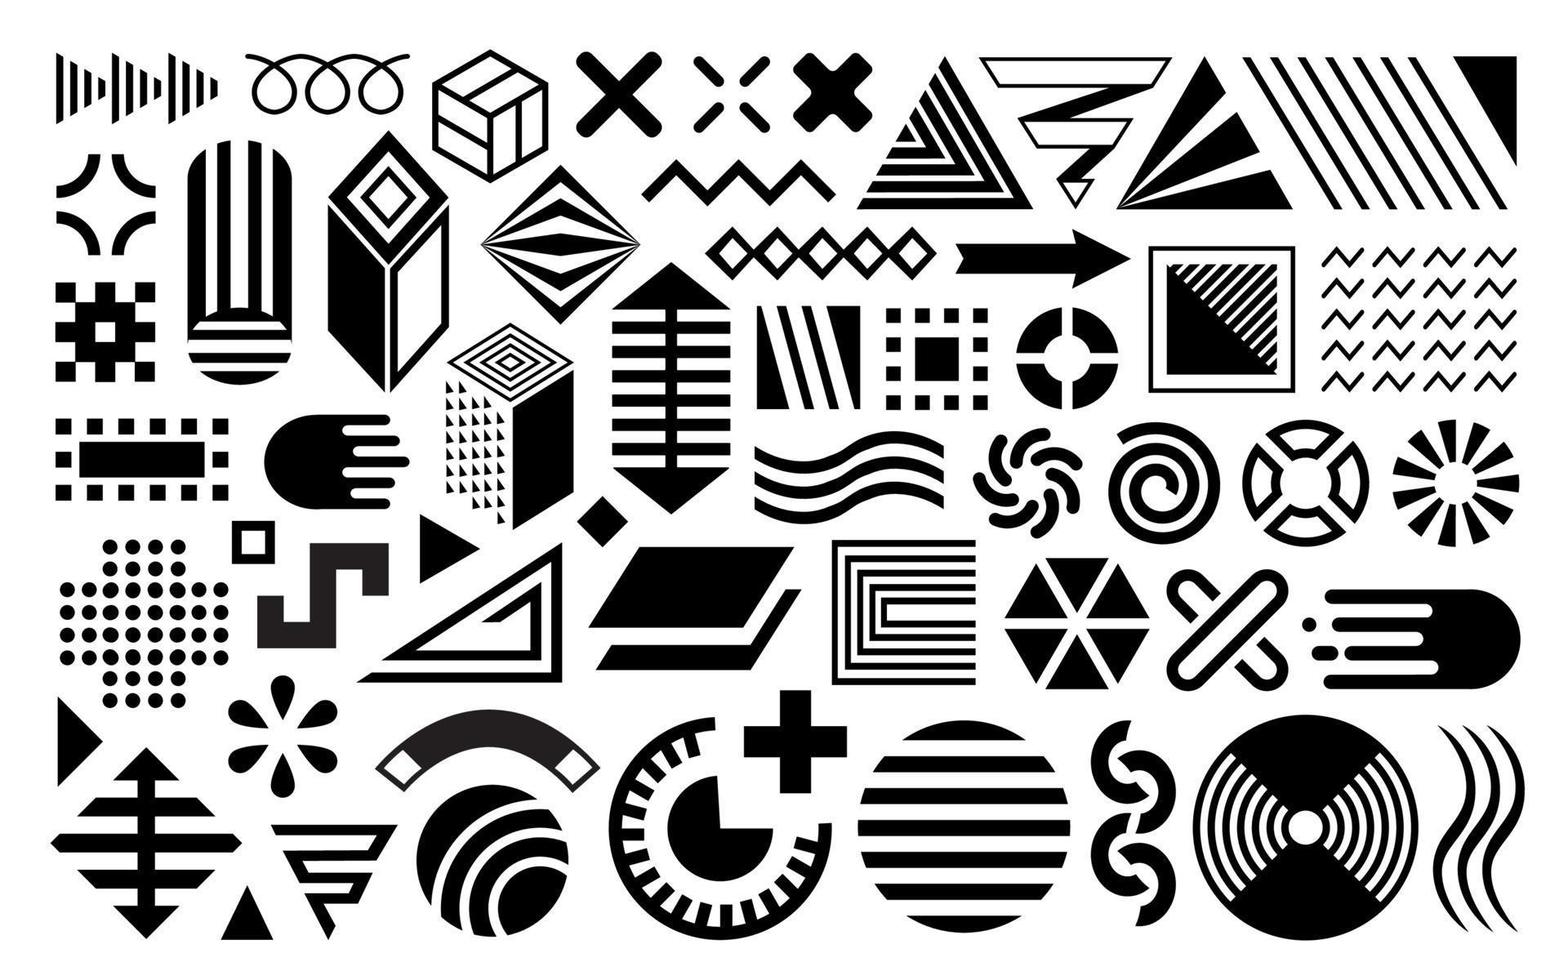 Abstract shapes, geometric design elements, Memphis set, vector abstract simple forms and figures in black isolated on white background. Trendy vintage decoration, 90's retro style.